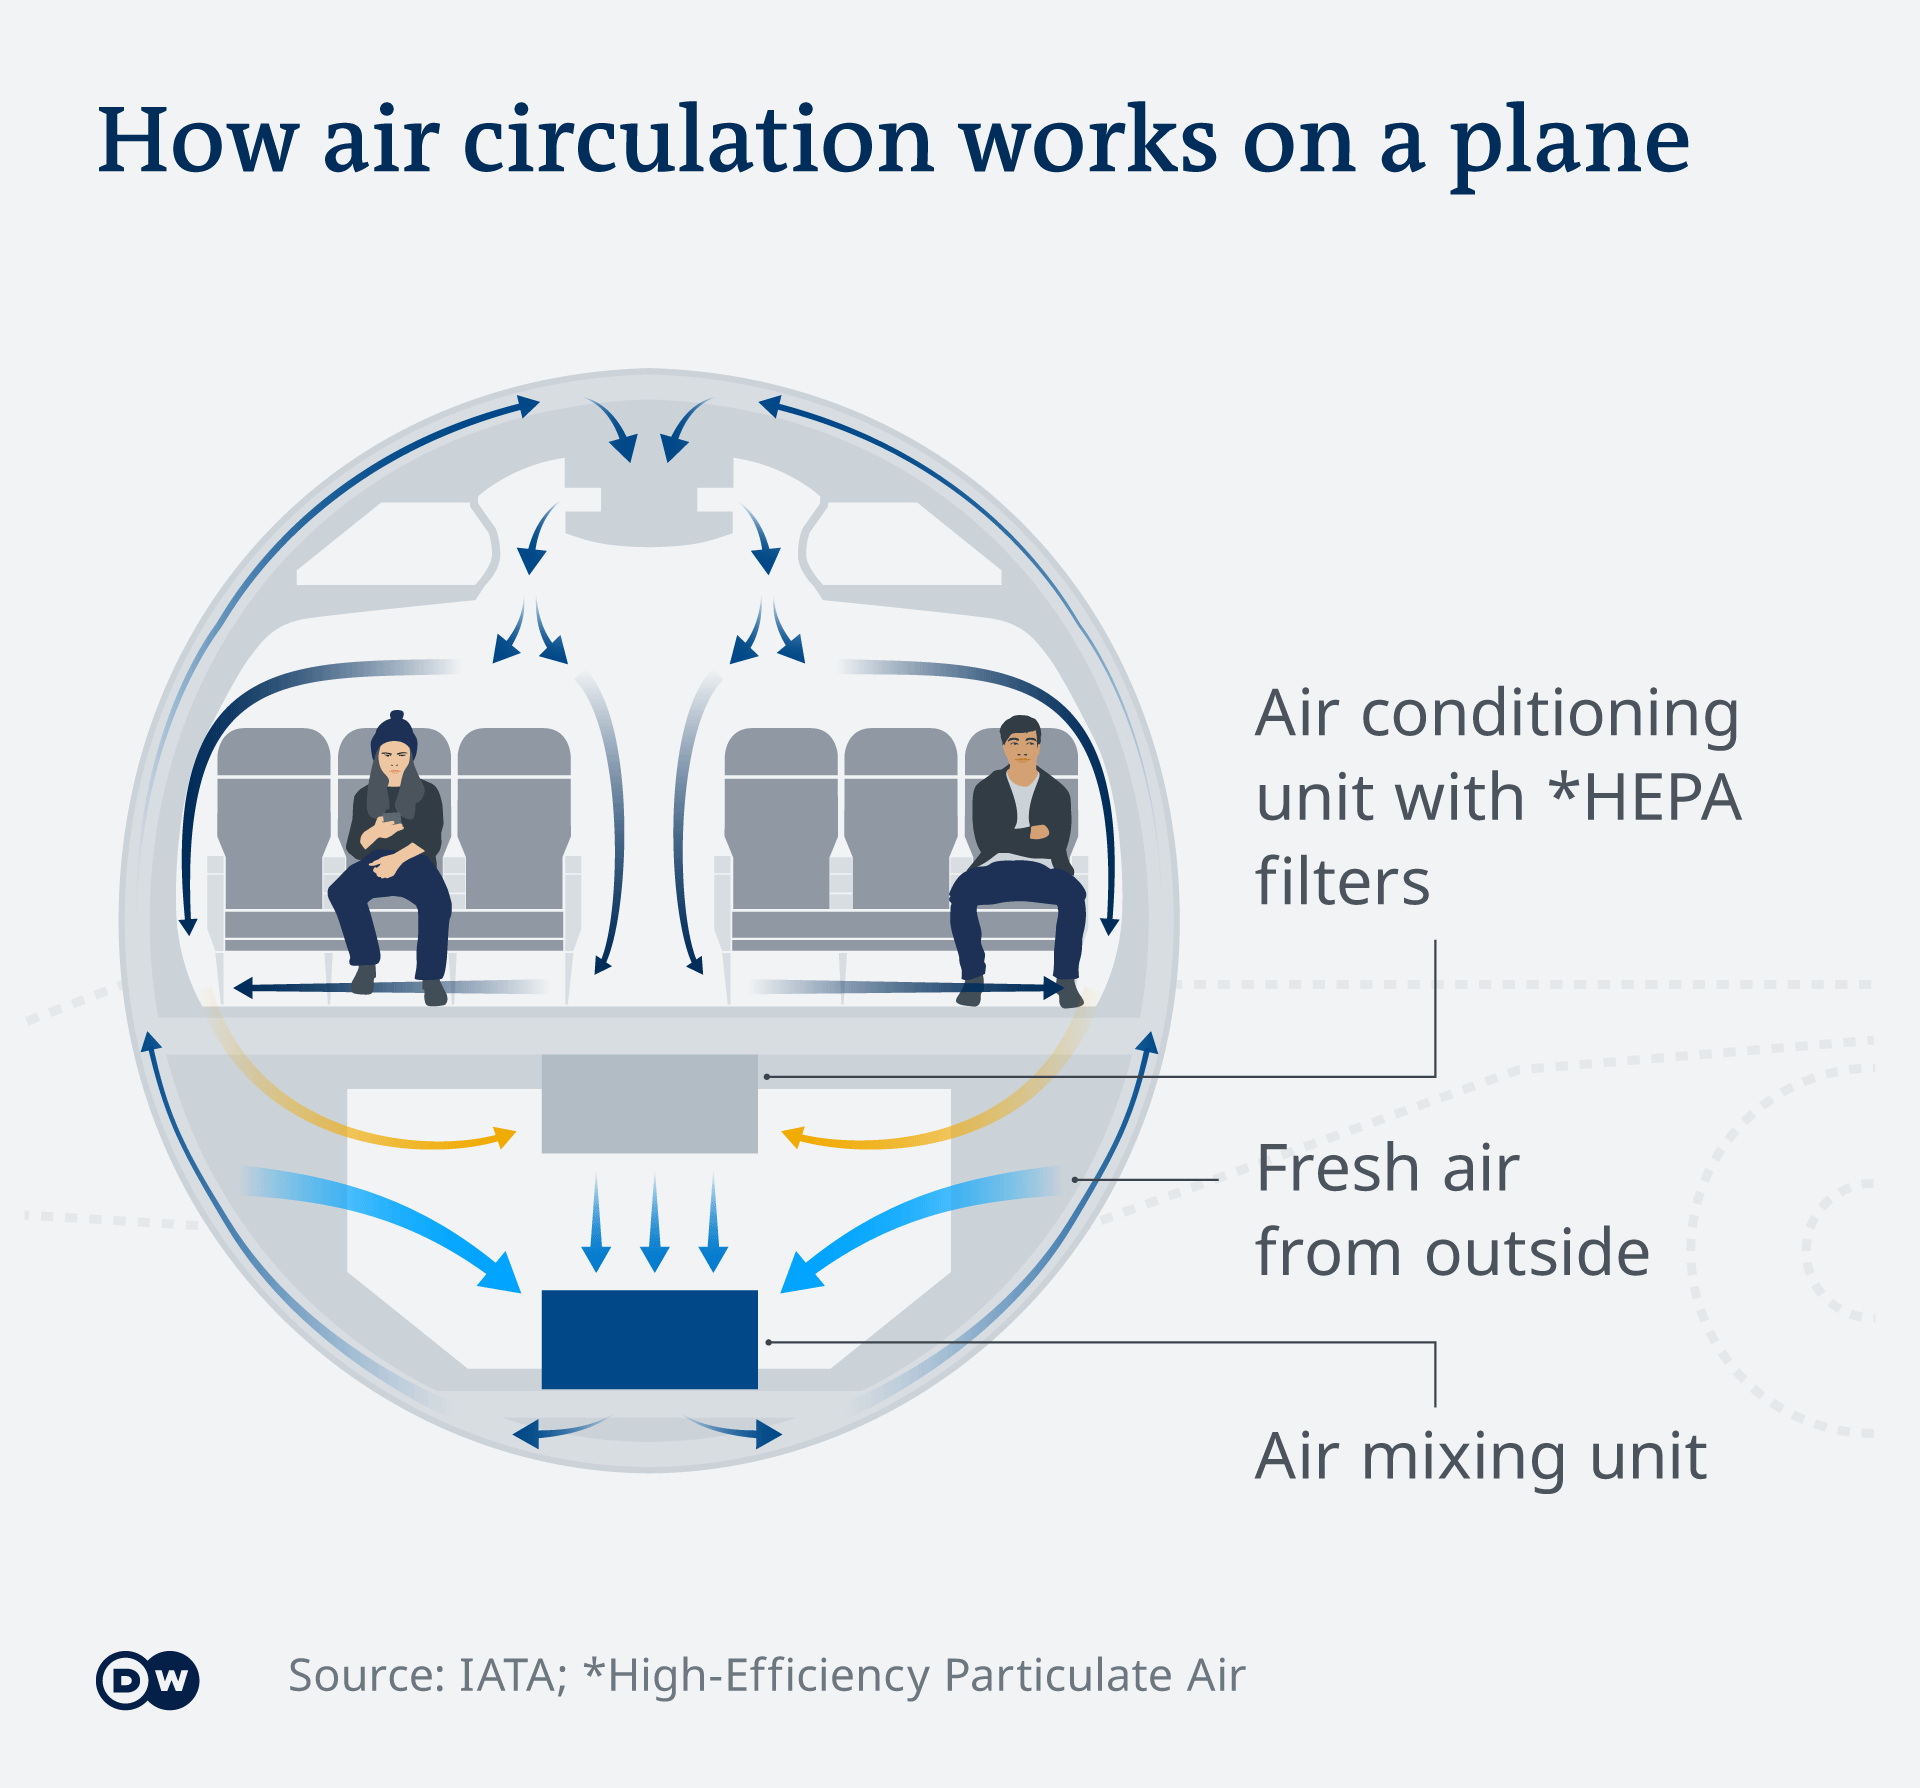 A graphic showing how air circulation works on a plane